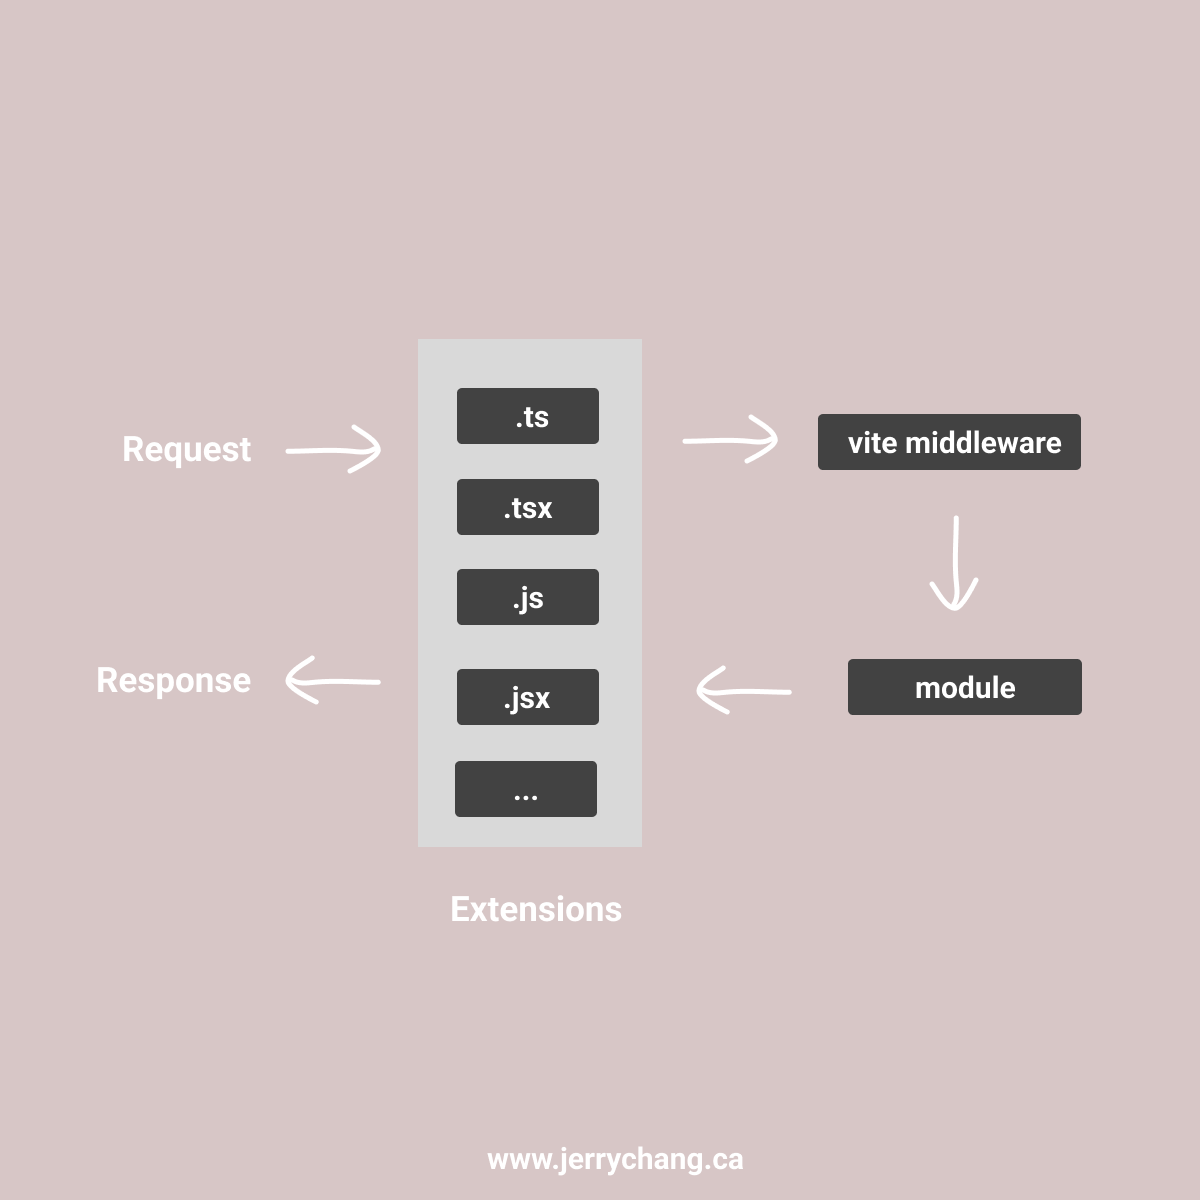 Vite: An illustration of the process of serving modules on demand